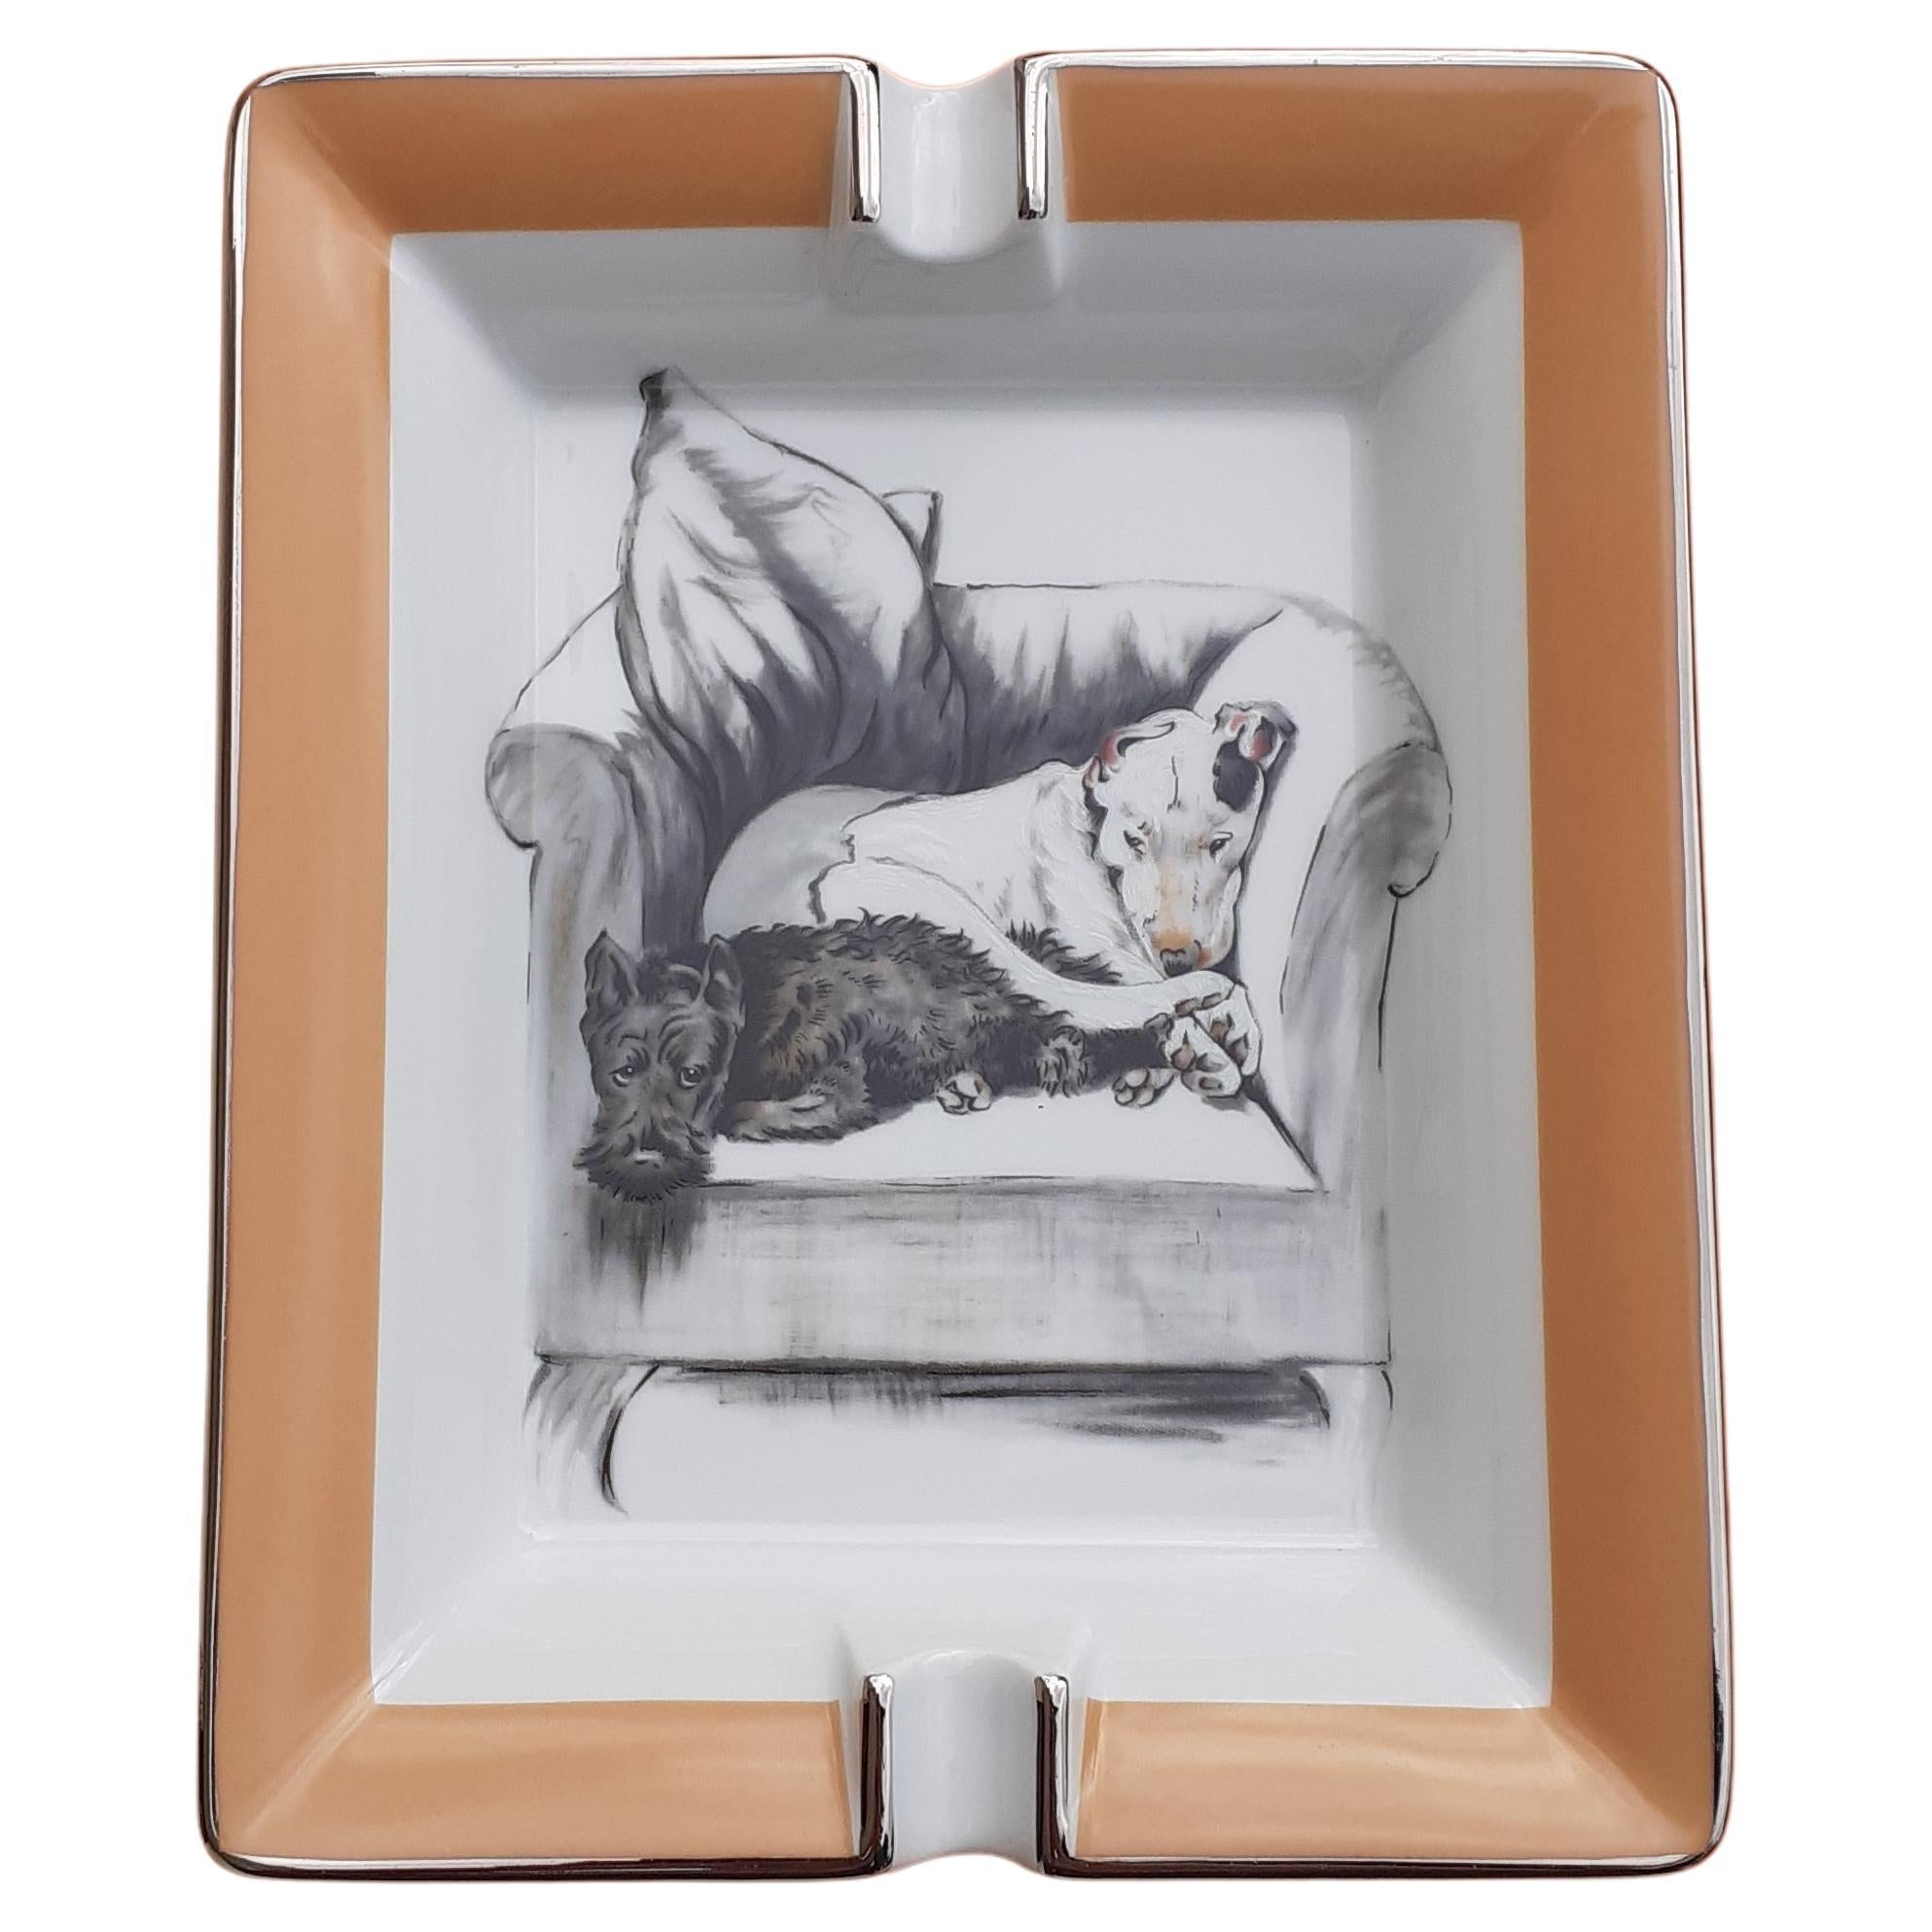 Rare and Adorable Authentic Hermès Ashtray

Print: 2 dogs napping on an armchair

Drawing from Cecil Aldin

Made in France

Made of printed porcelain and silvery edges

Camel color leather at bottom

Colorways: White, Beige, Grey

The white dog has